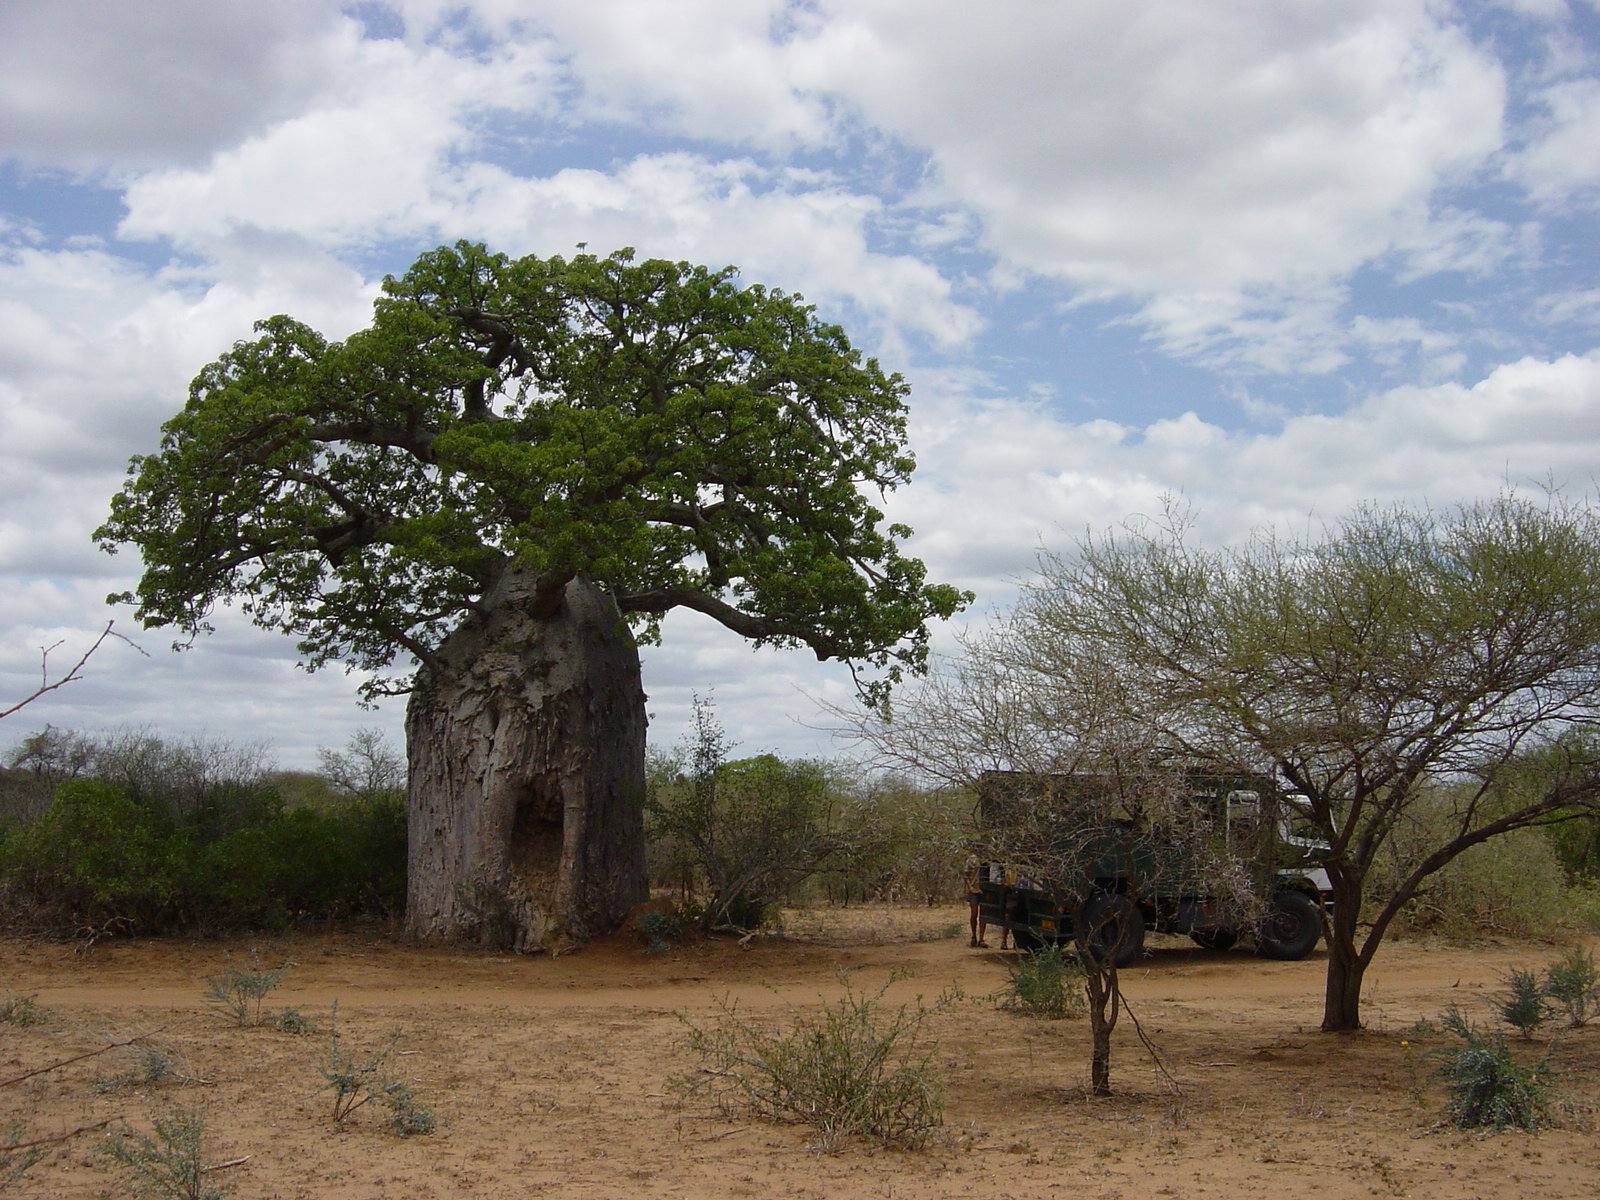 Mozambique - Baobab tree by aunt on DeviantArt